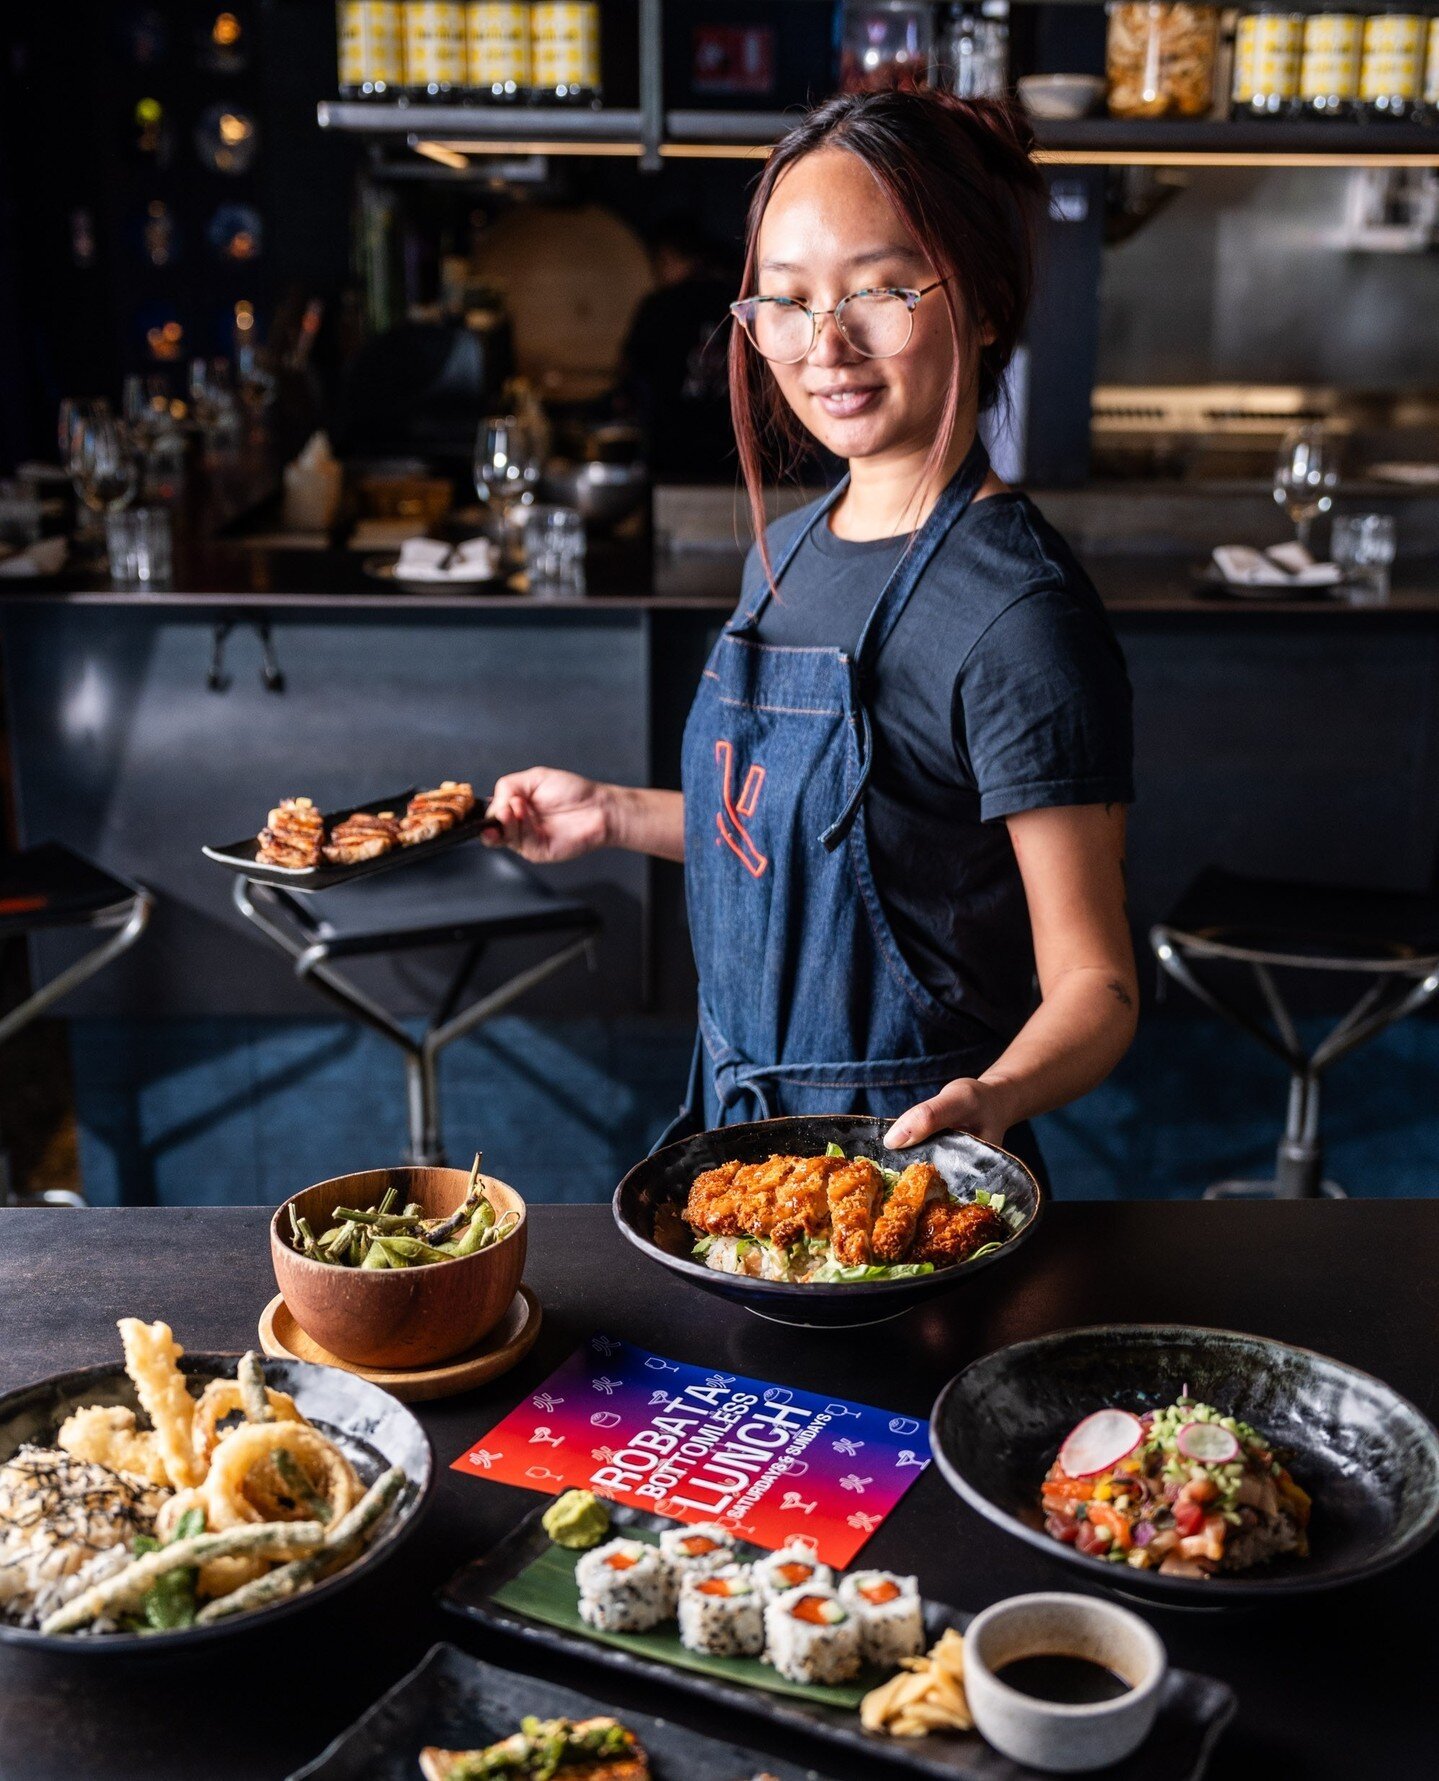 Our recent visit to @robatamelbourne had us creating some exciting content for their Bottomless Lunch campaign - such an epic sesh! 🙌🏼⁠
⁠
Trust us, if you're looking for an epic feed with flowing drinks this weekend, make sure to try these legends 